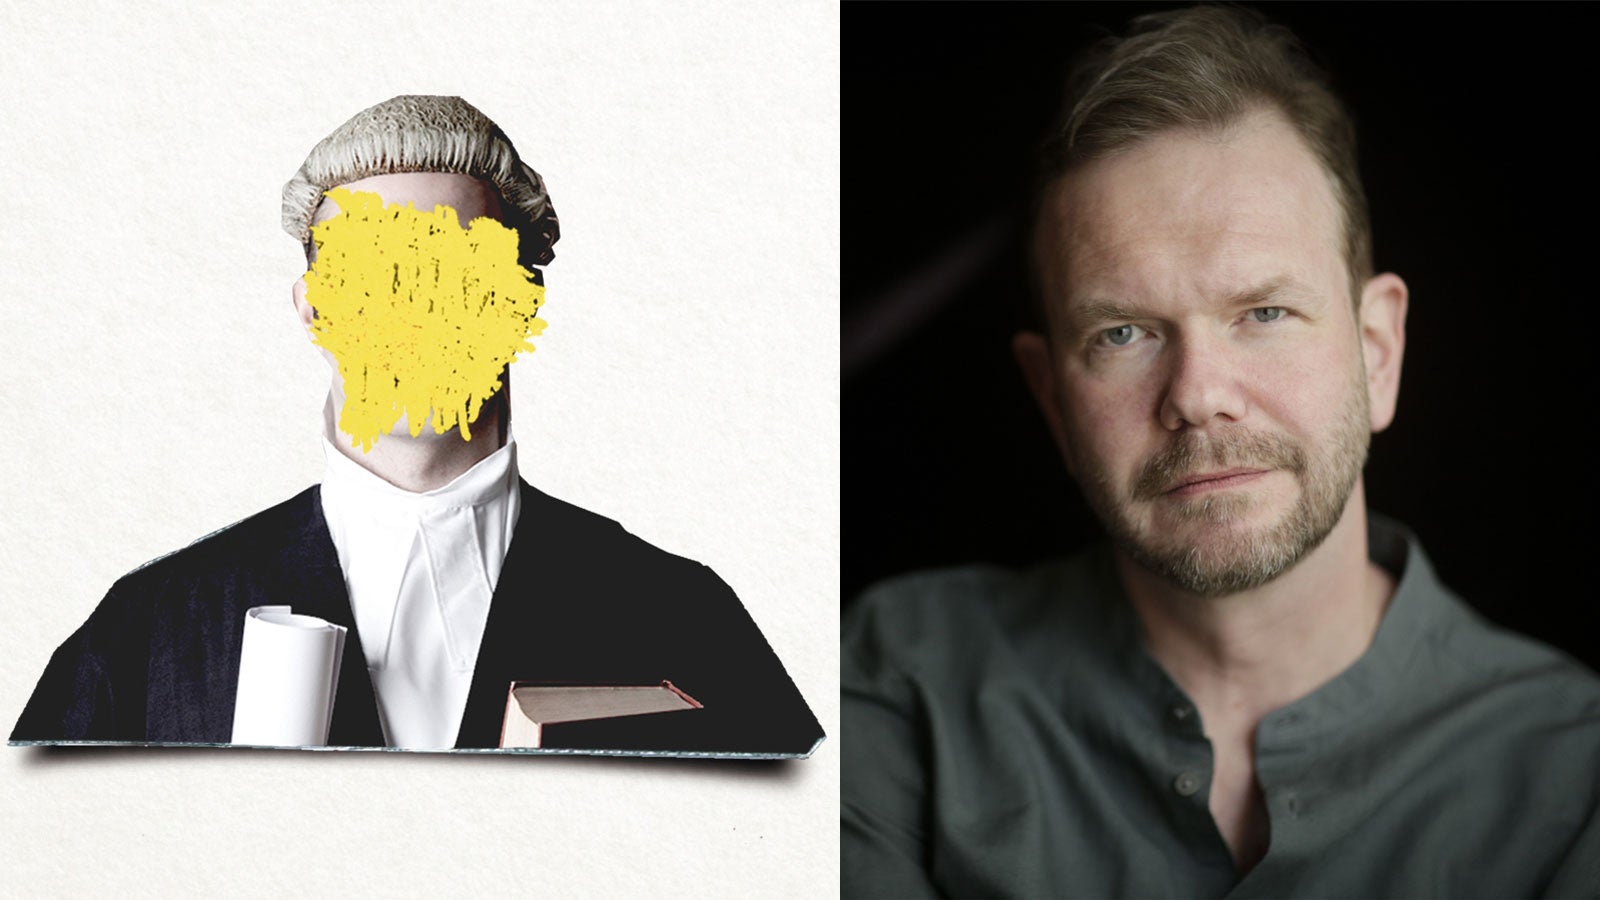 Image of an illustration of a barrister with the face scribbled out taken from the book cover of The Secret Barrister, and photo of James O'Brien